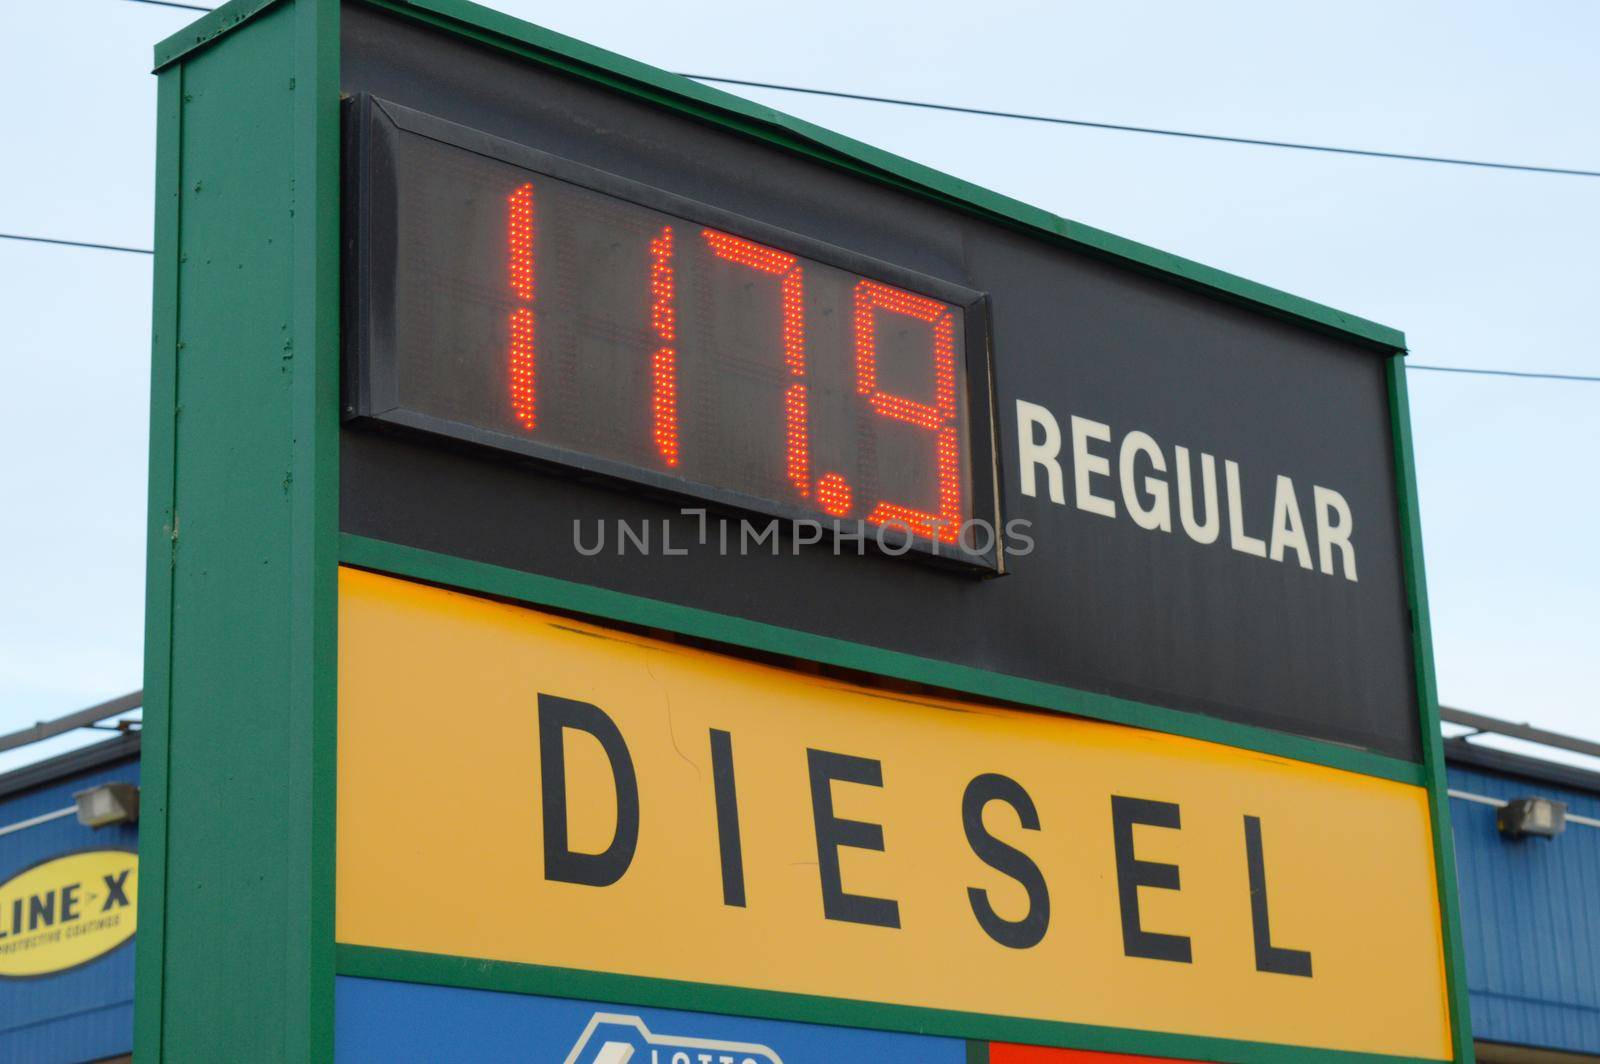 SMITHS FALLS, ONTARIO, CANADA, MARCH 10, 2021: A closeup view of the gas prices on this day at the Drummonds Gas Station located in small town Smiths Falls, ON.